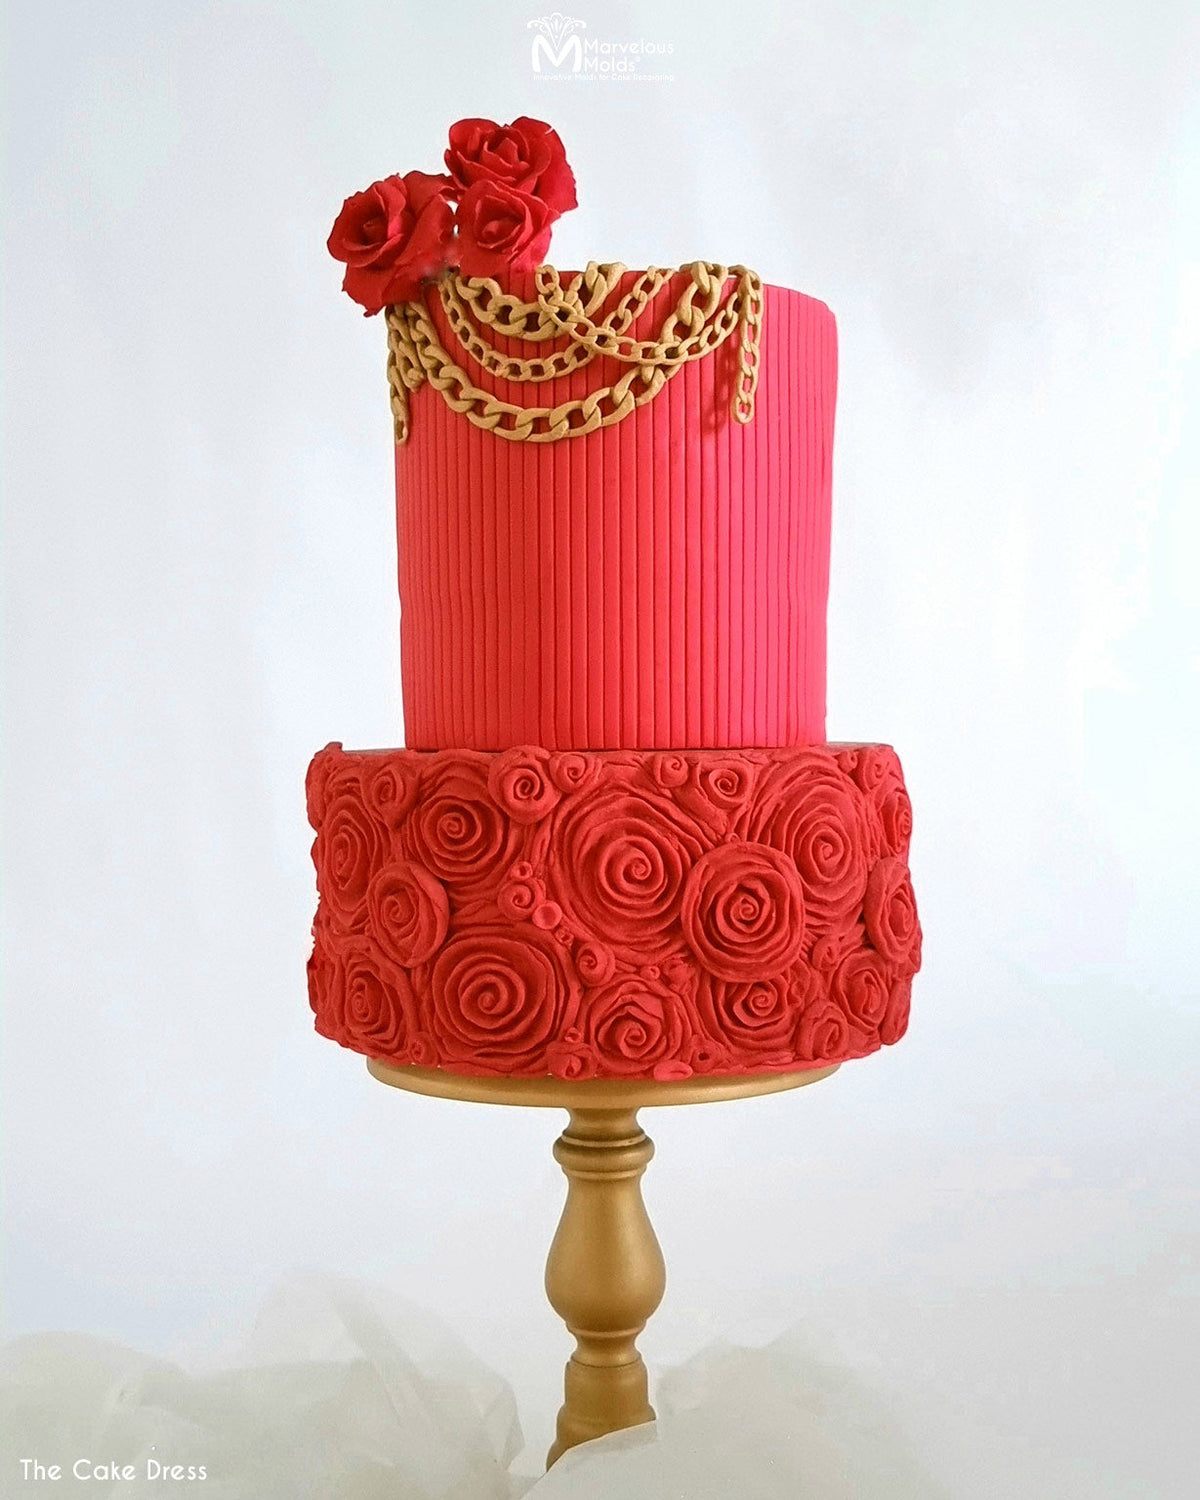 Red Rose Cake Decorated with Realistic Fashion Accents, Created Using the Marvelous Molds Medium Chain PinchPro Silicone Mold for Cake Decorating